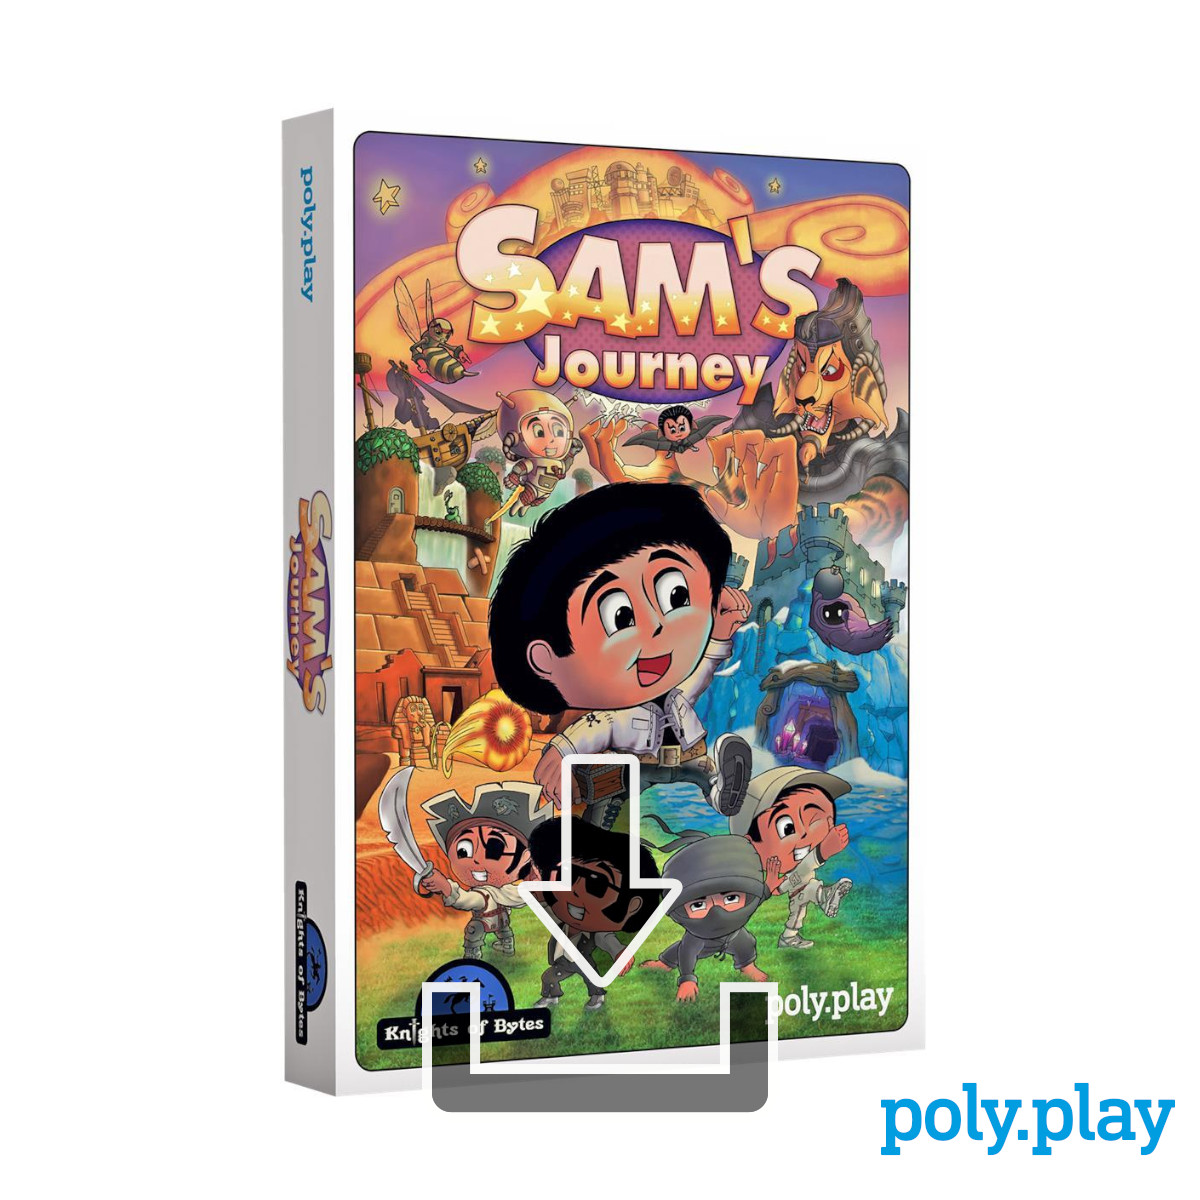 Sam's Journey Download Edition At Poly.Play